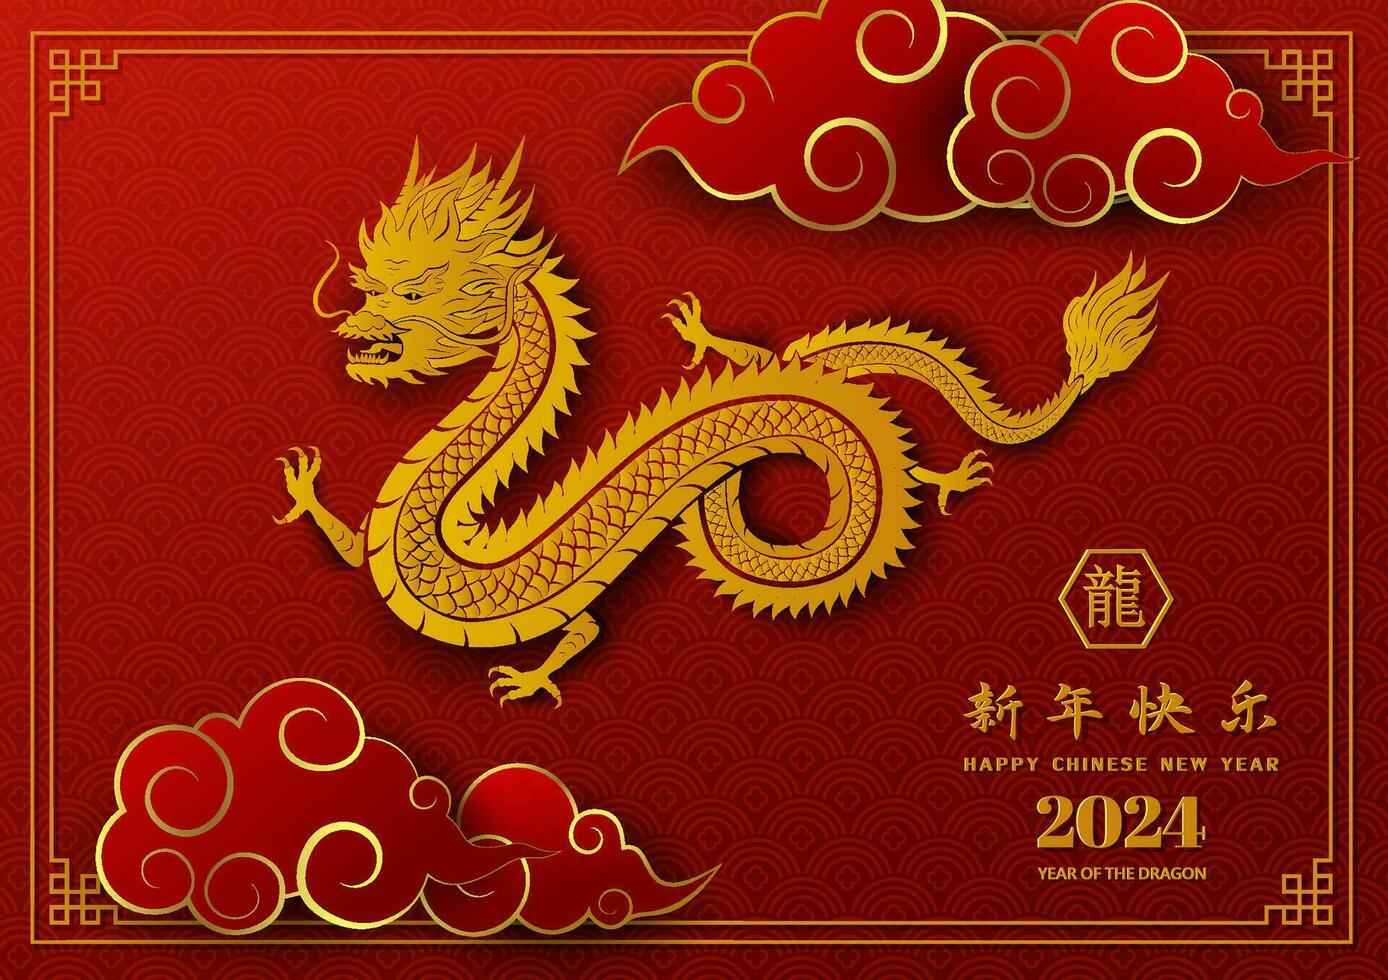 Happy Chinese new year 2024 with gold dragon zodiac sign isolated on red background,Chinese translate mean happy new year 2024,year of the dragon vector